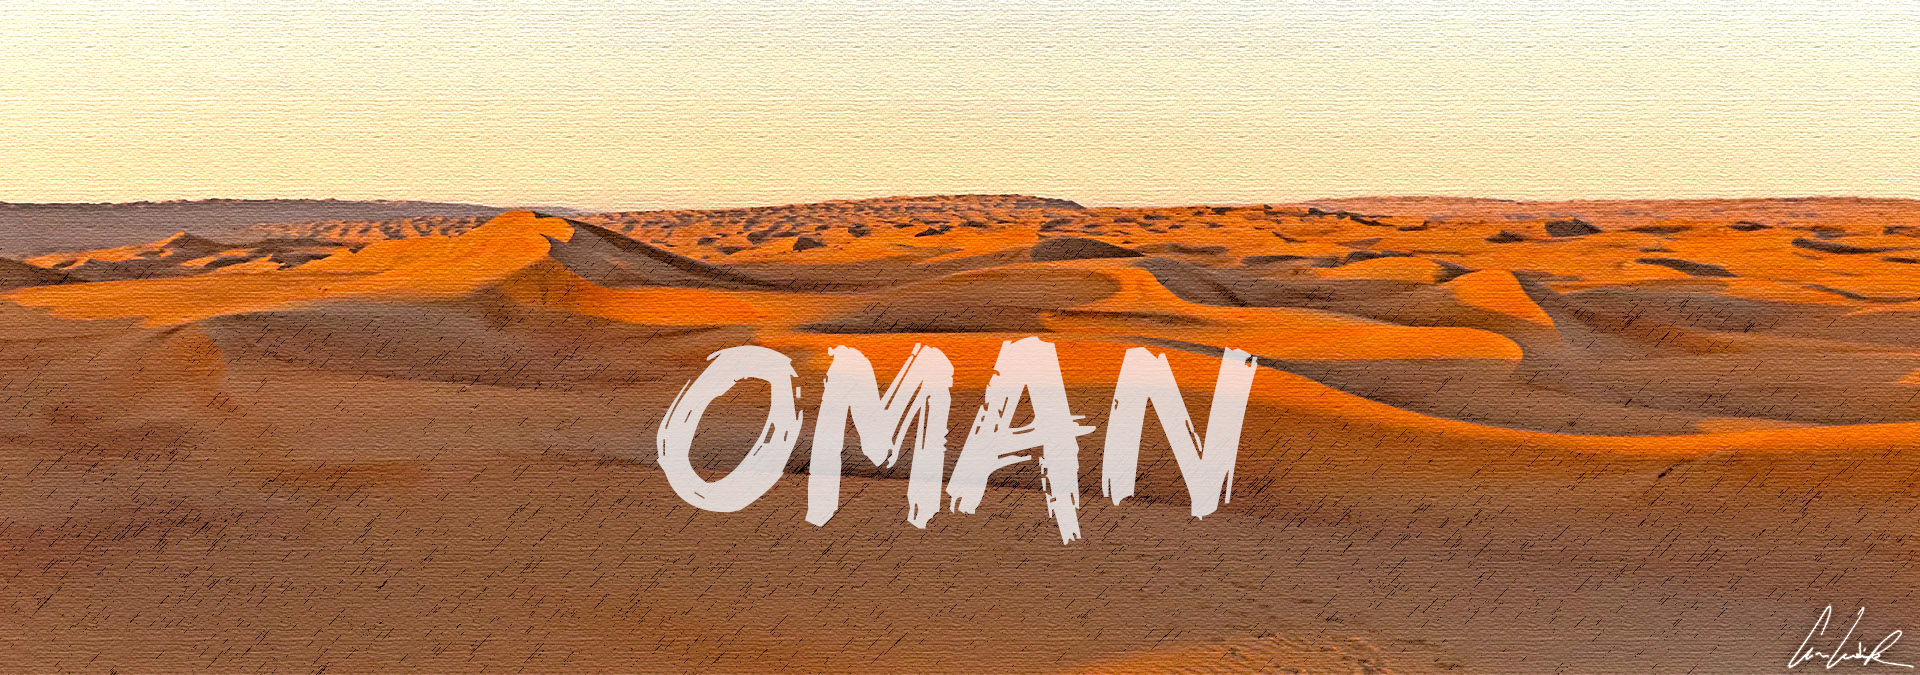 The Sultanate of Oman: Land of ancestral traditions and exchanges but also of deserts and green valleys, Oman fascinates the travelers.